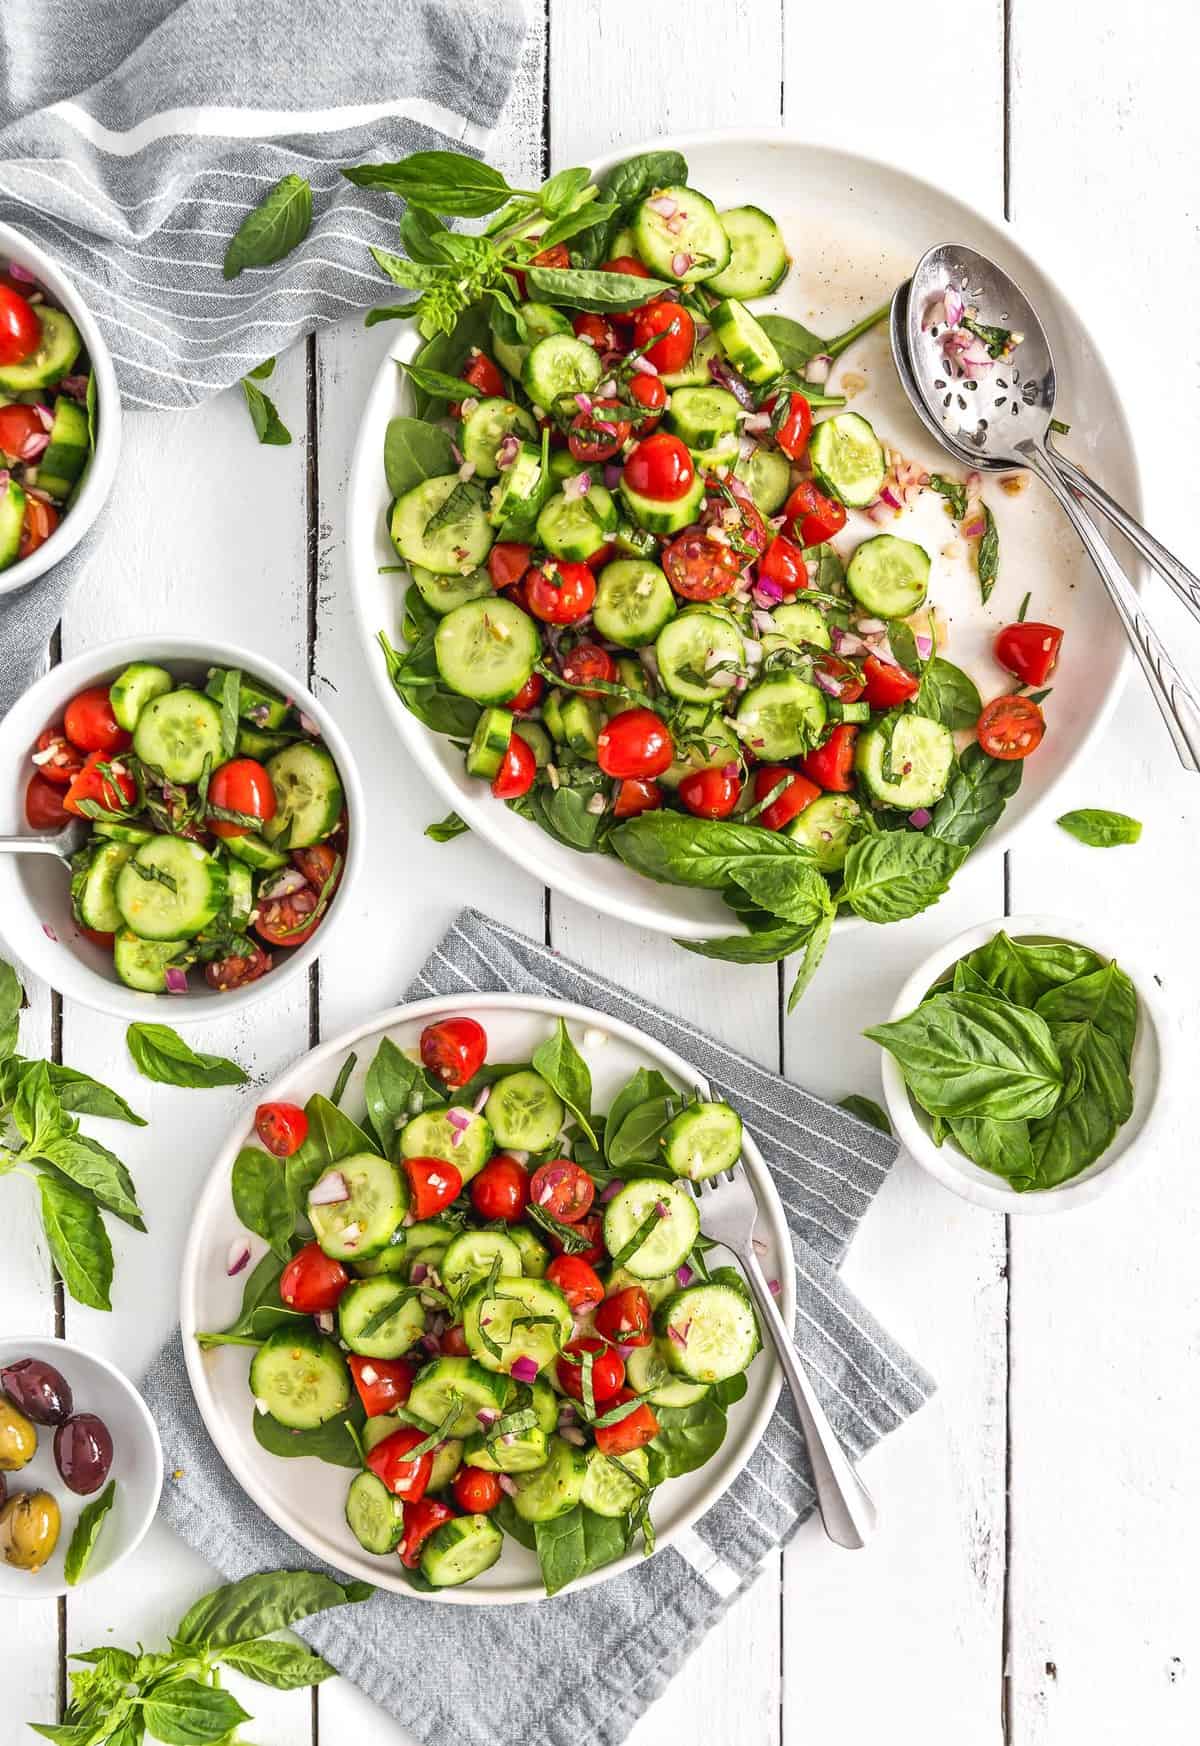 Cucumber Tomato Salad, cucumbers, tomato, salad, plant based, vegan, vegetarian, whole food plant based, gluten free, recipe, wfpb, healthy, healthy vegan, oil free, no refined sugar, no oil, refined sugar free, dairy free, appetizer, starter, snack, dinner, lunch, veggies